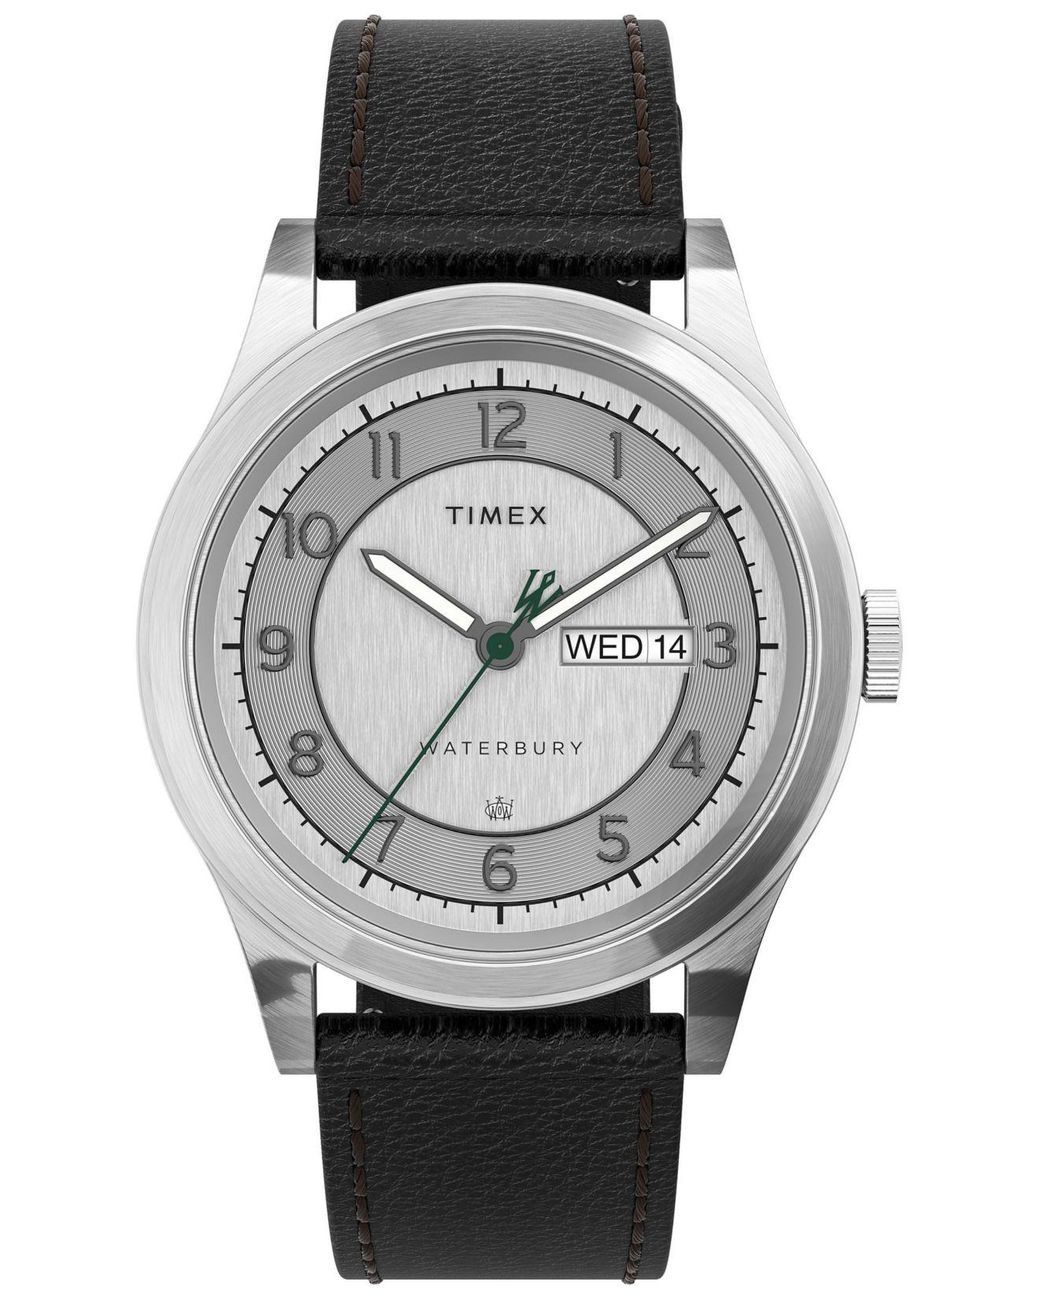 Timex Waterbury Traditional Day-date Black Leather Strap Watch 39mm for ...